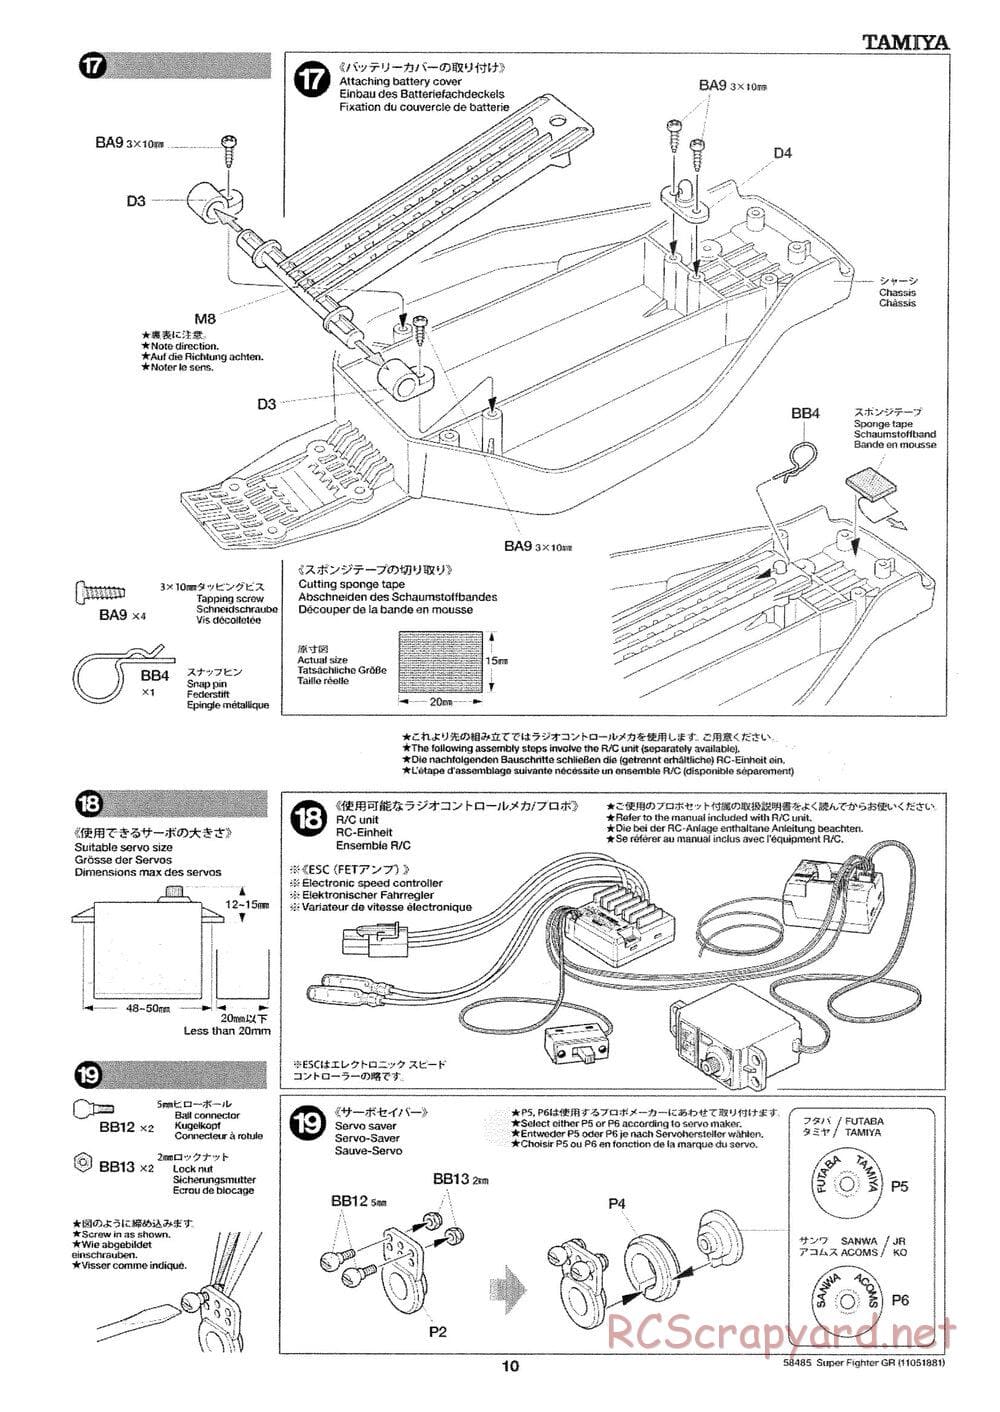 Tamiya - Super Fighter GR - DT-02 Chassis - Manual - Page 10